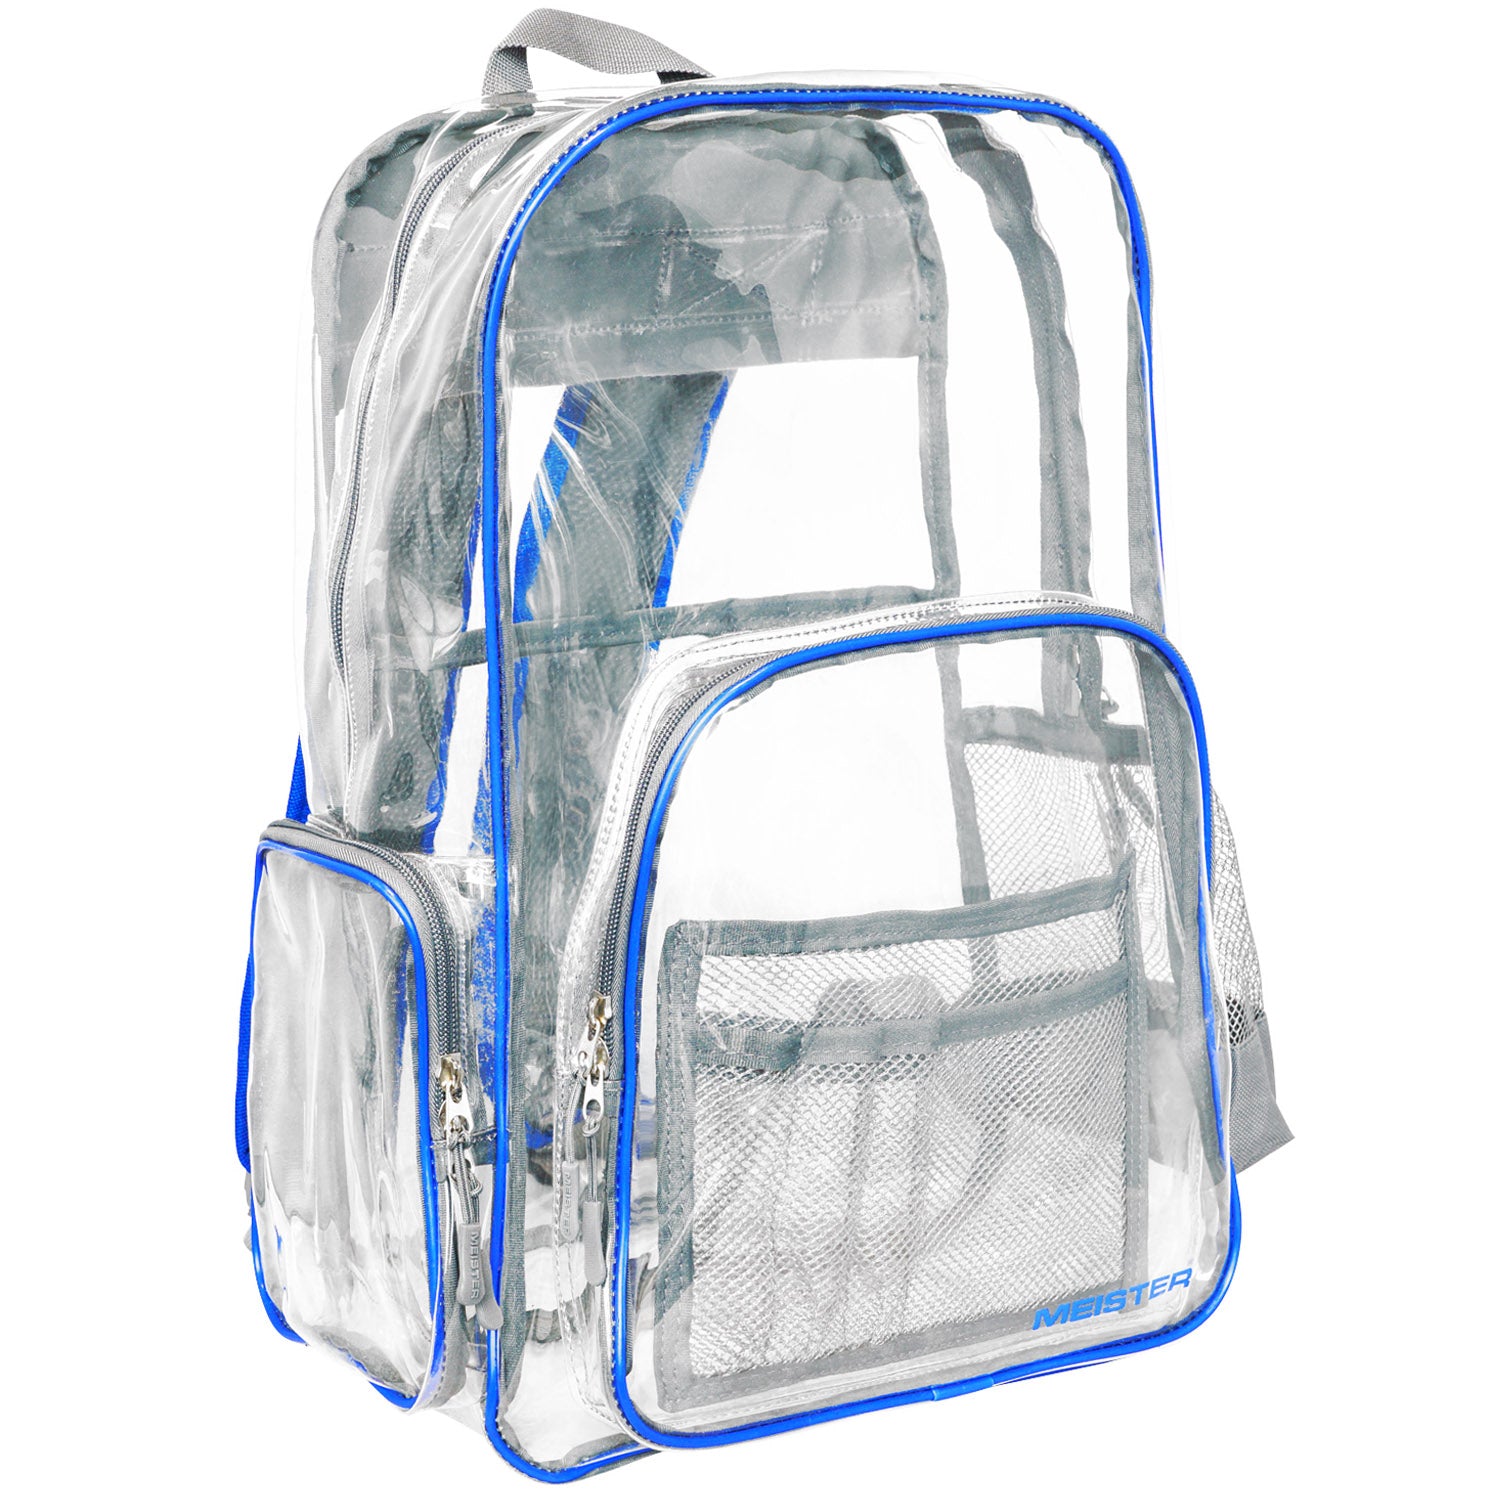 Meister All-Access Clear Backpack - Blue / Gray